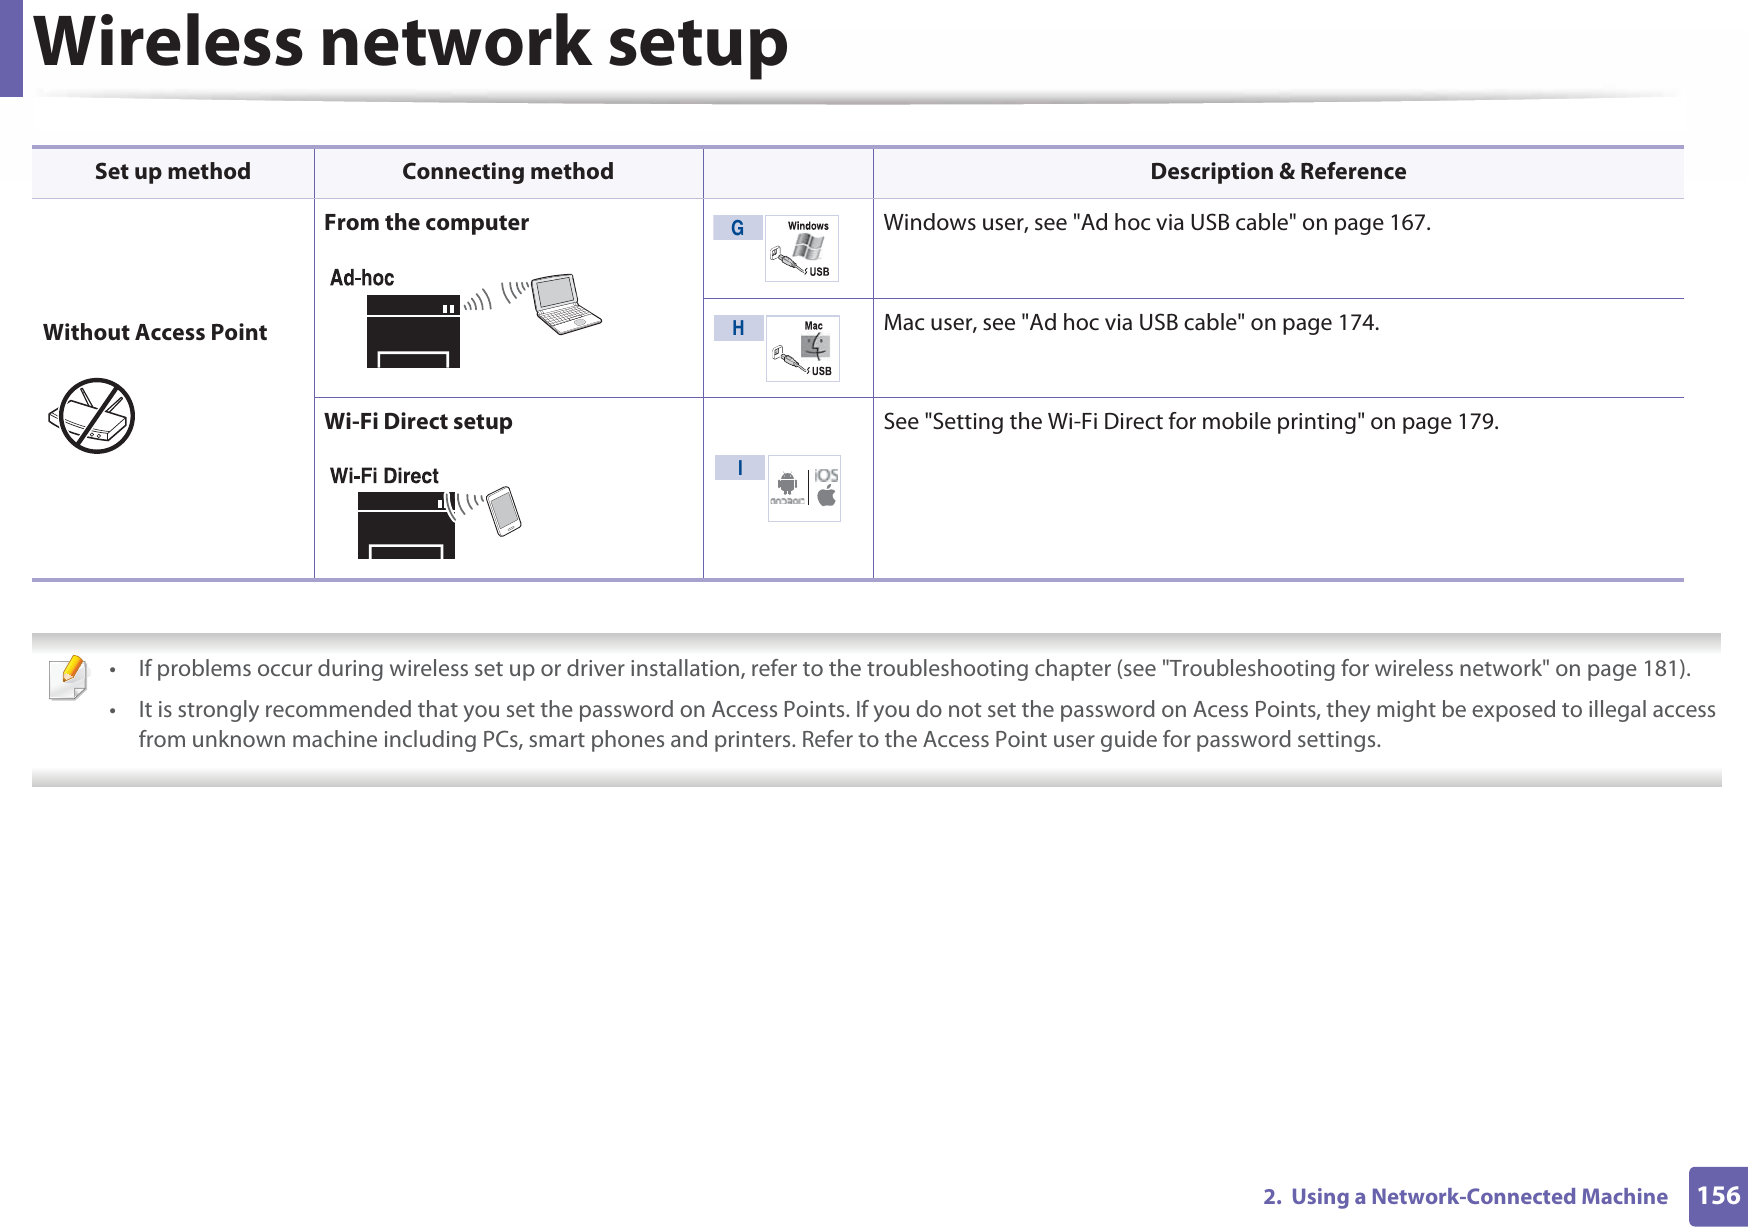 Wireless network setup1562.  Using a Network-Connected Machine  • If problems occur during wireless set up or driver installation, refer to the troubleshooting chapter (see &quot;Troubleshooting for wireless network&quot; on page 181).• It is strongly recommended that you set the password on Access Points. If you do not set the password on Acess Points, they might be exposed to illegal access from unknown machine including PCs, smart phones and printers. Refer to the Access Point user guide for password settings. Without Access PointFrom the computer Windows user, see &quot;Ad hoc via USB cable&quot; on page 167.Mac user, see &quot;Ad hoc via USB cable&quot; on page 174.Wi-Fi Direct setup See &quot;Setting the Wi-Fi Direct for mobile printing&quot; on page 179.Set up method Connecting method Description &amp; ReferenceGH I